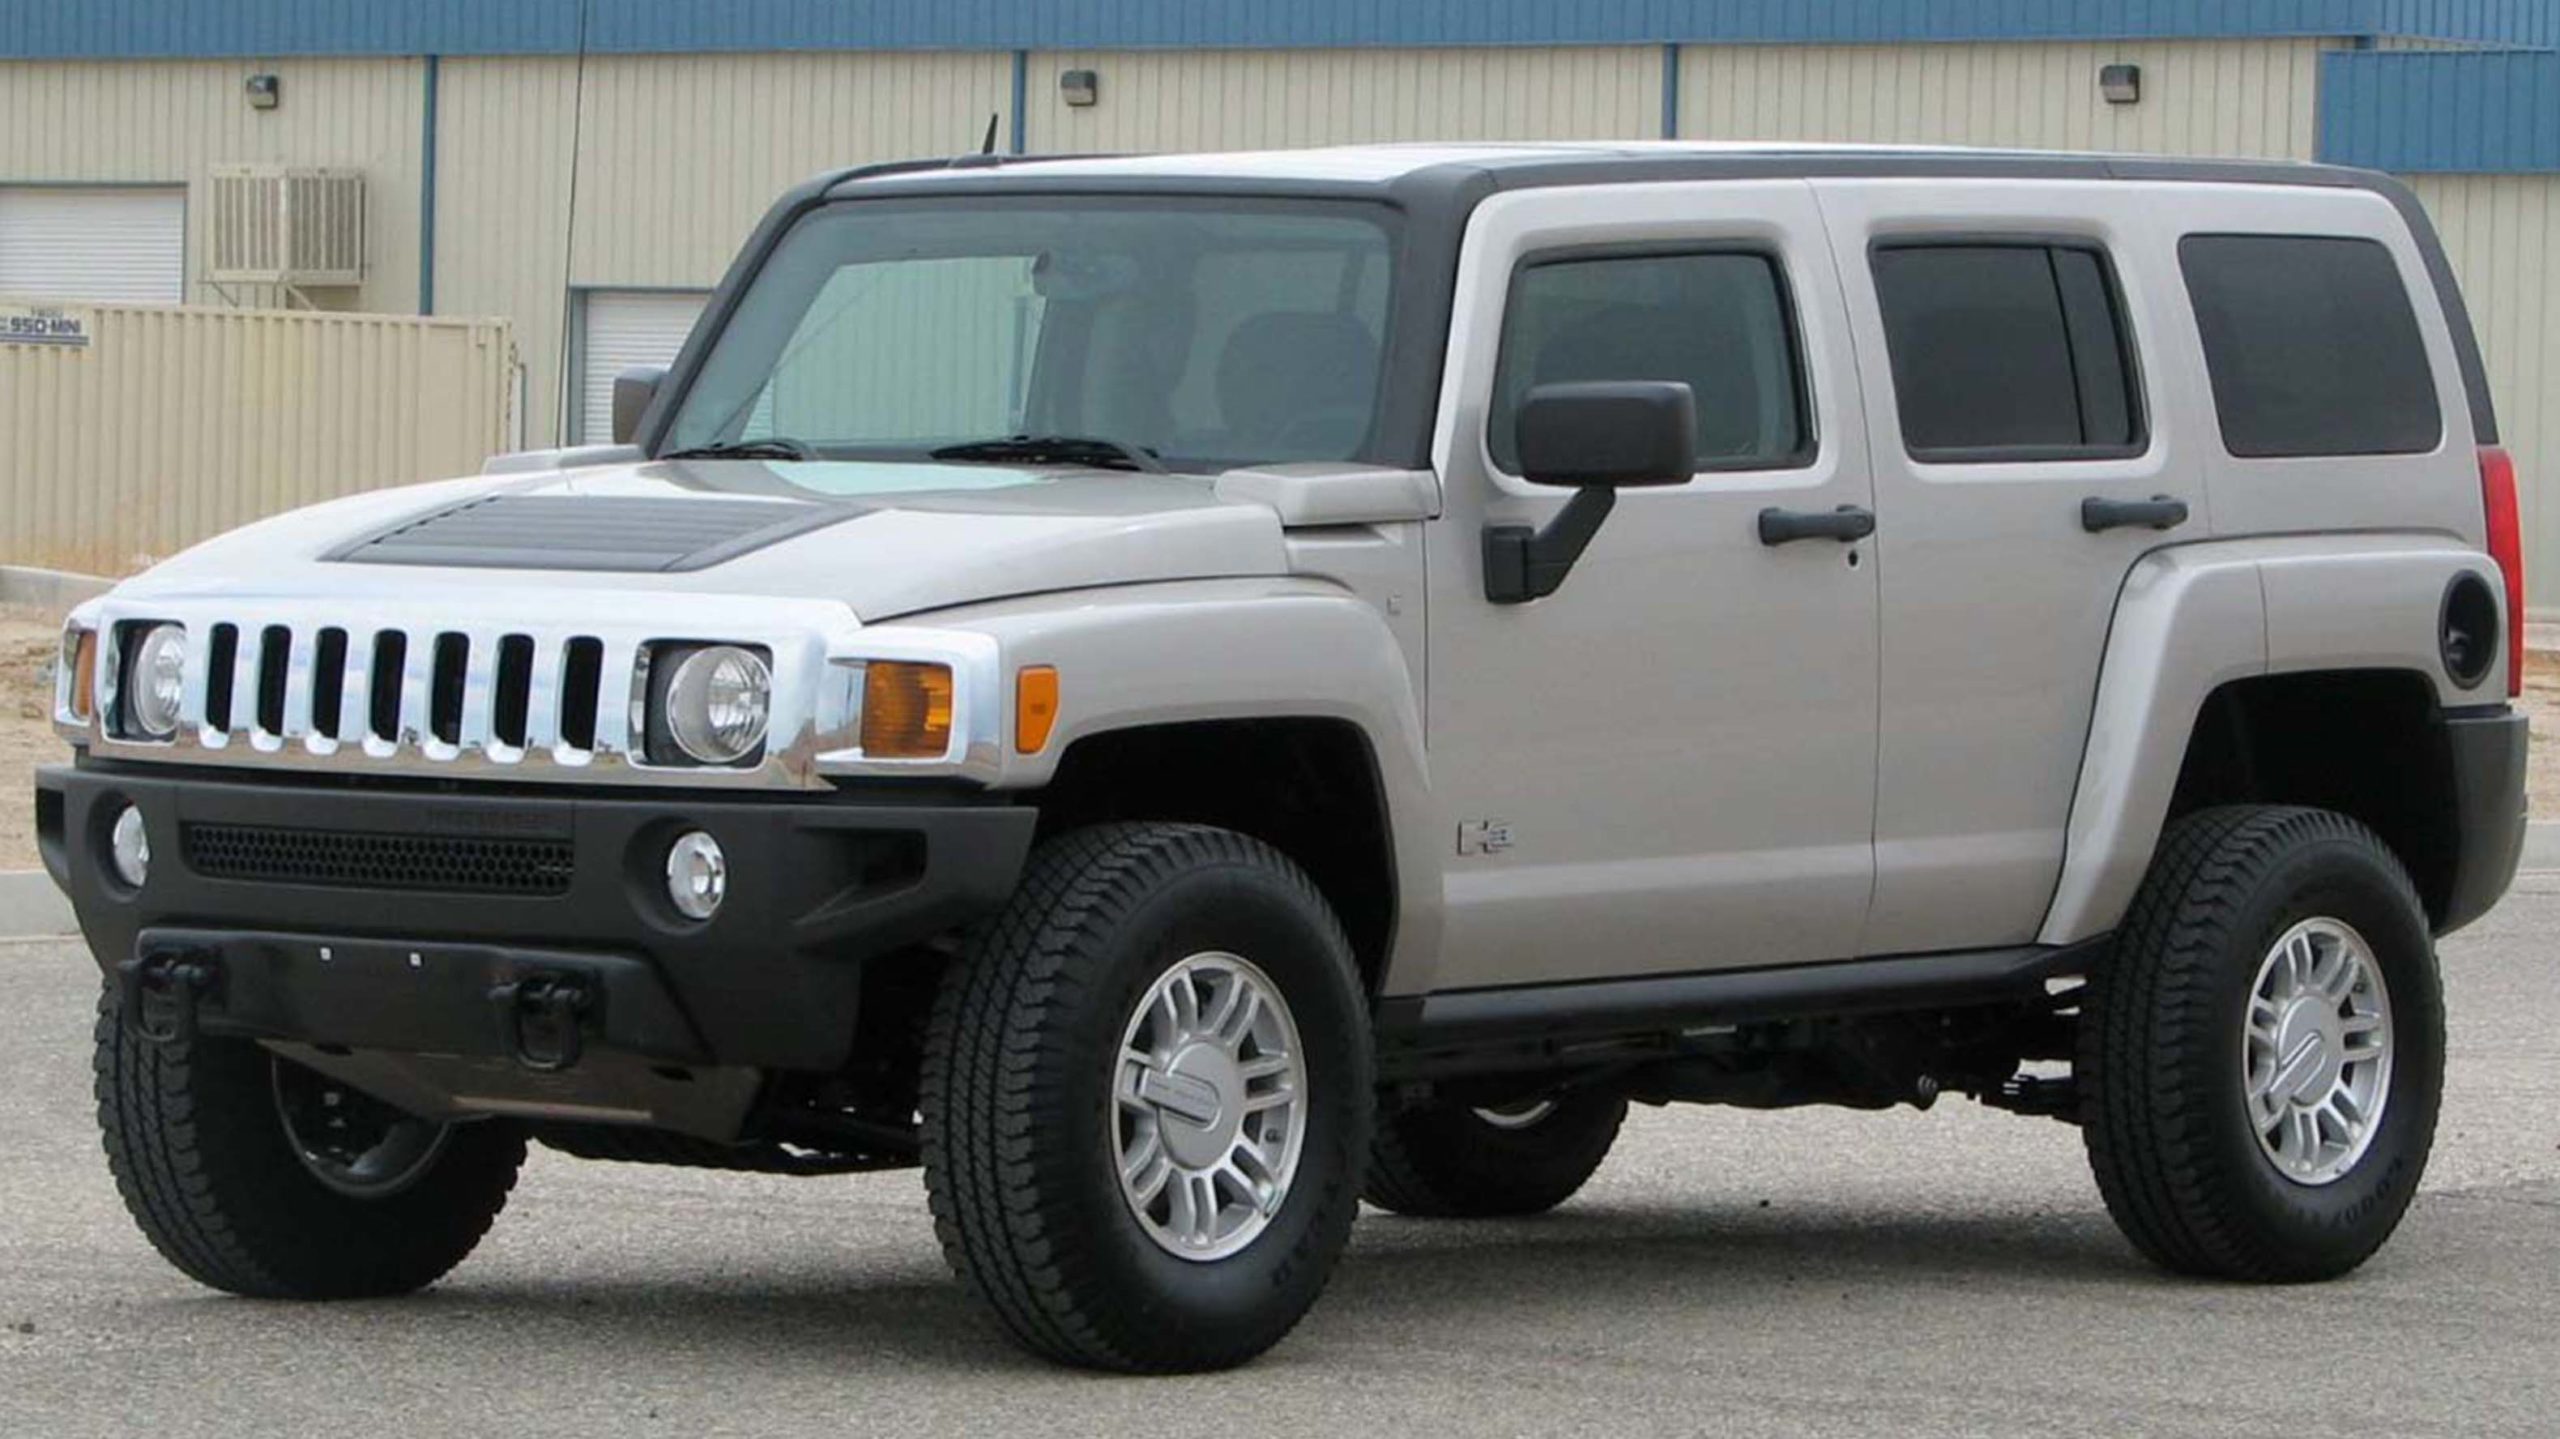 GM to revive Hummer brand with all-electric pickup truck2560 x 1439